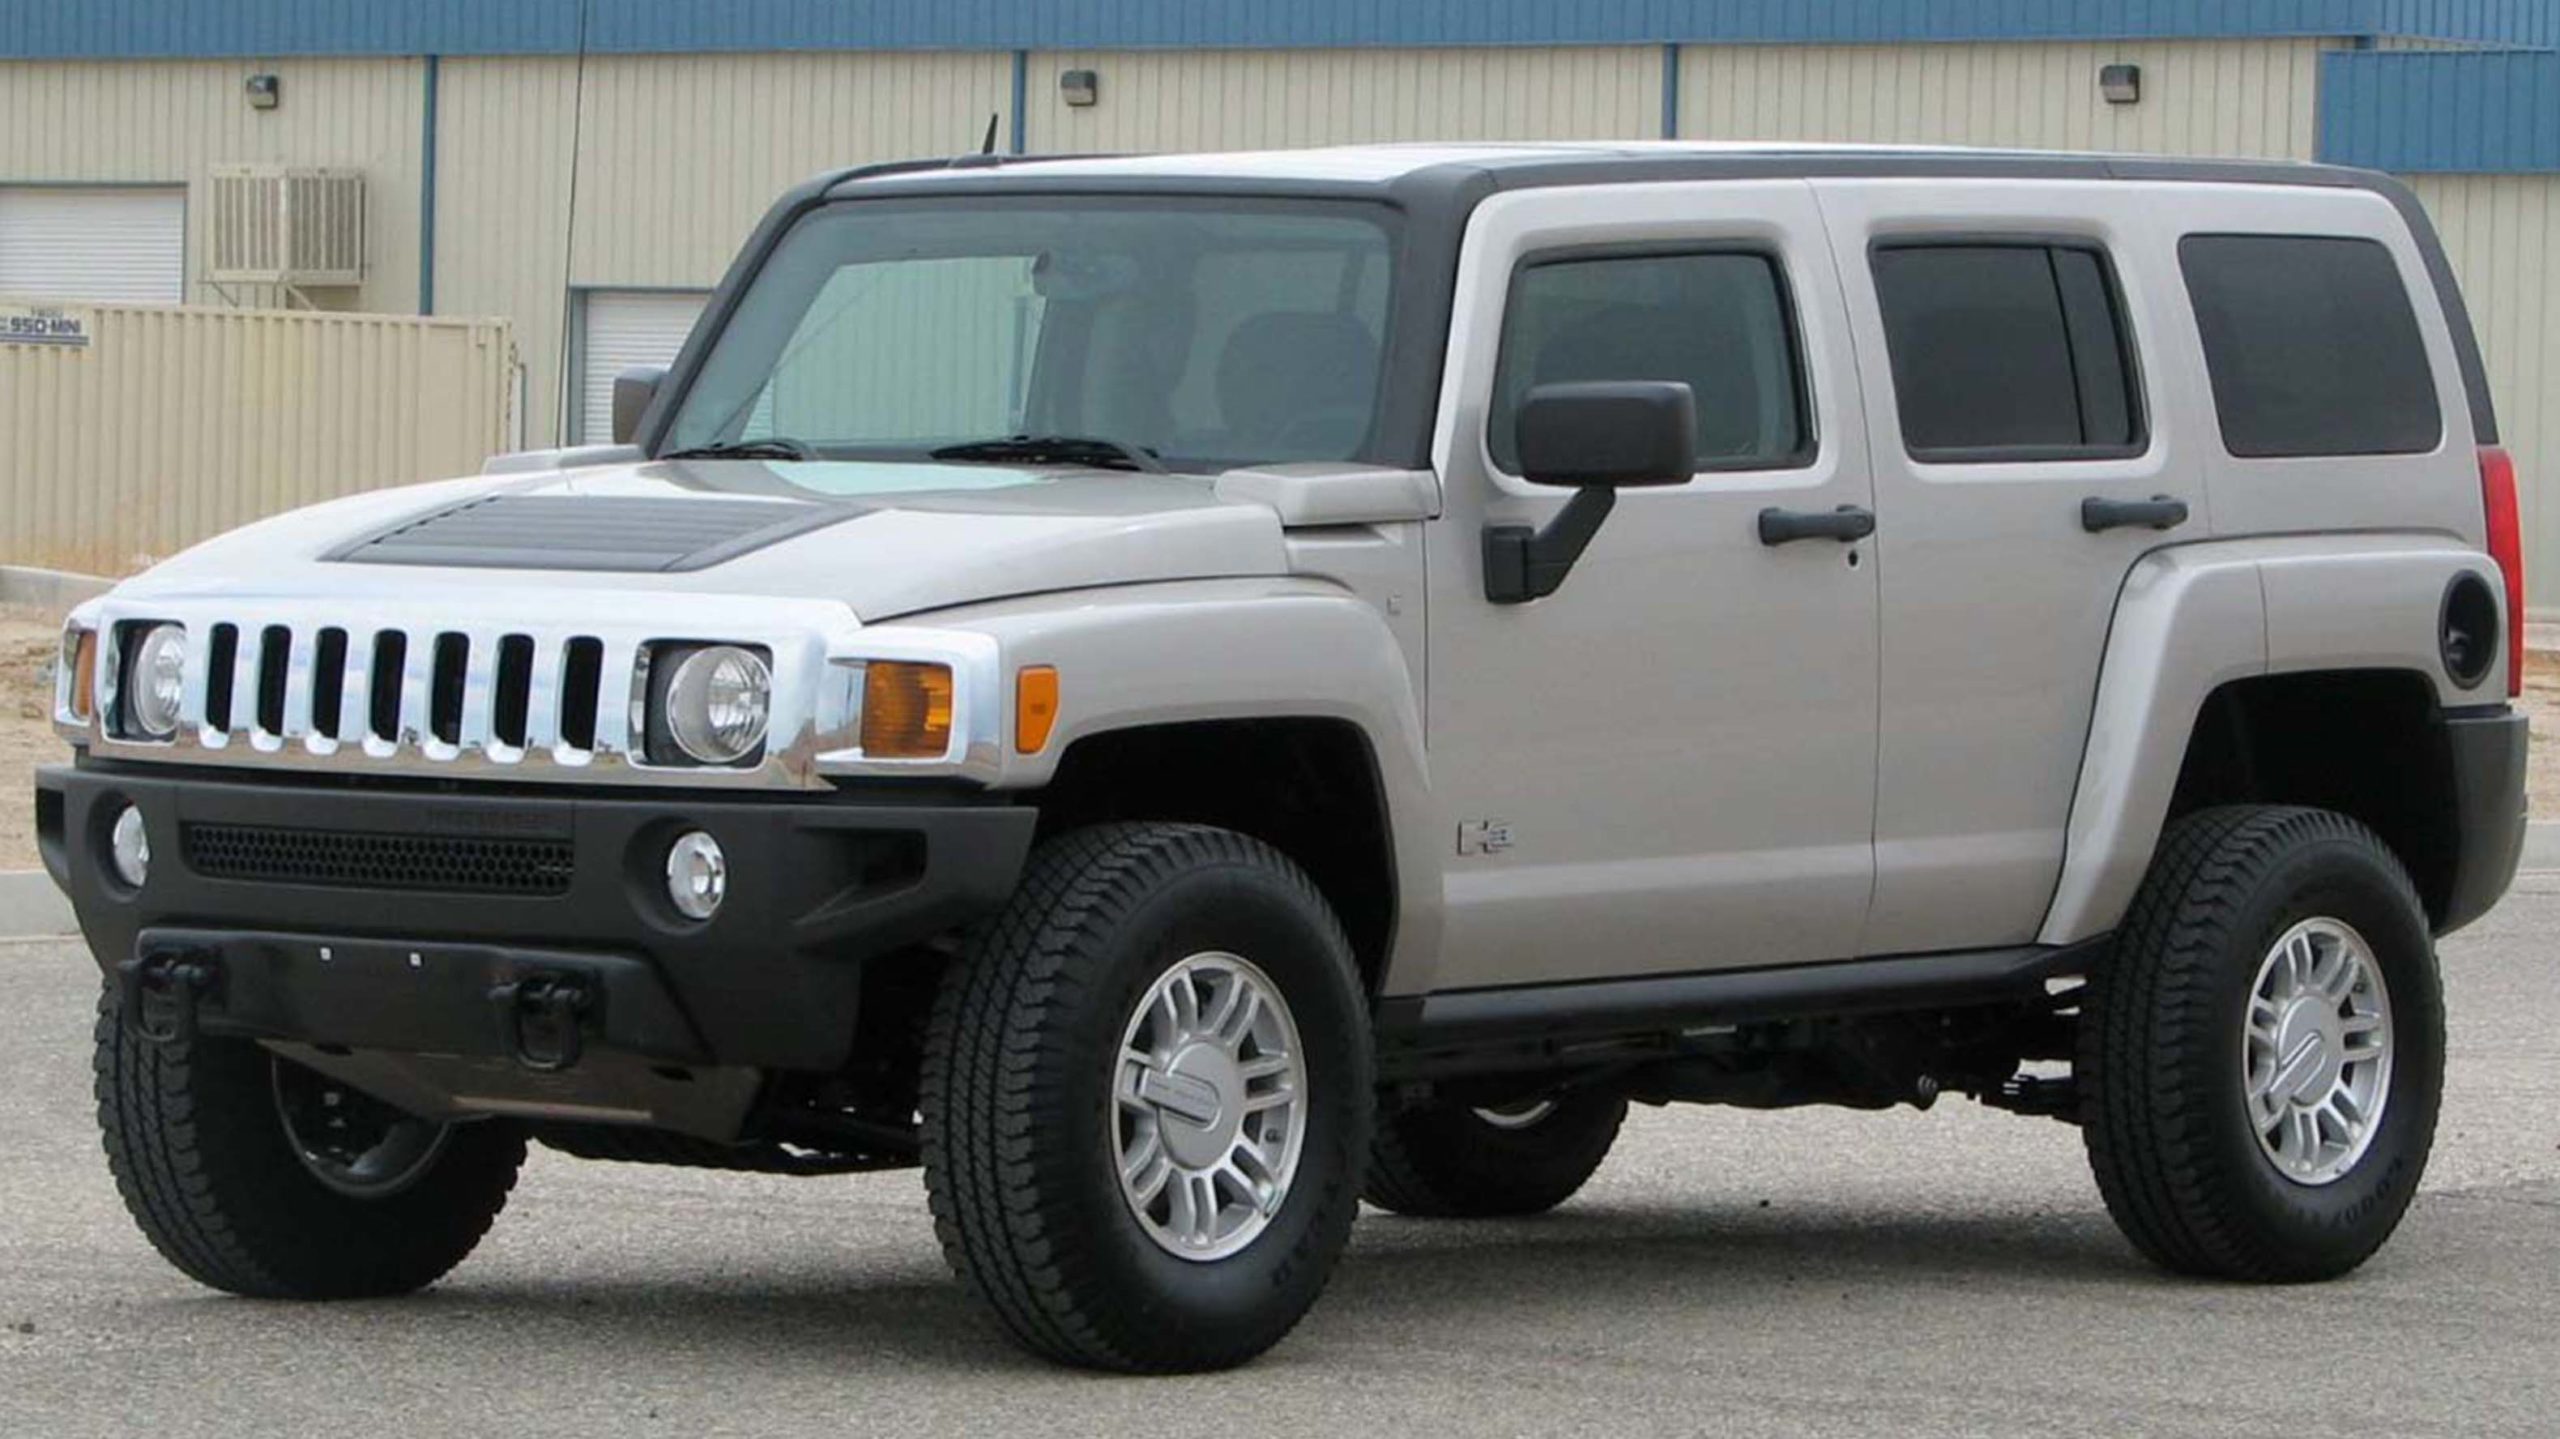 GM to revive Hummer brand with all-electric pickup truck2560 x 1439